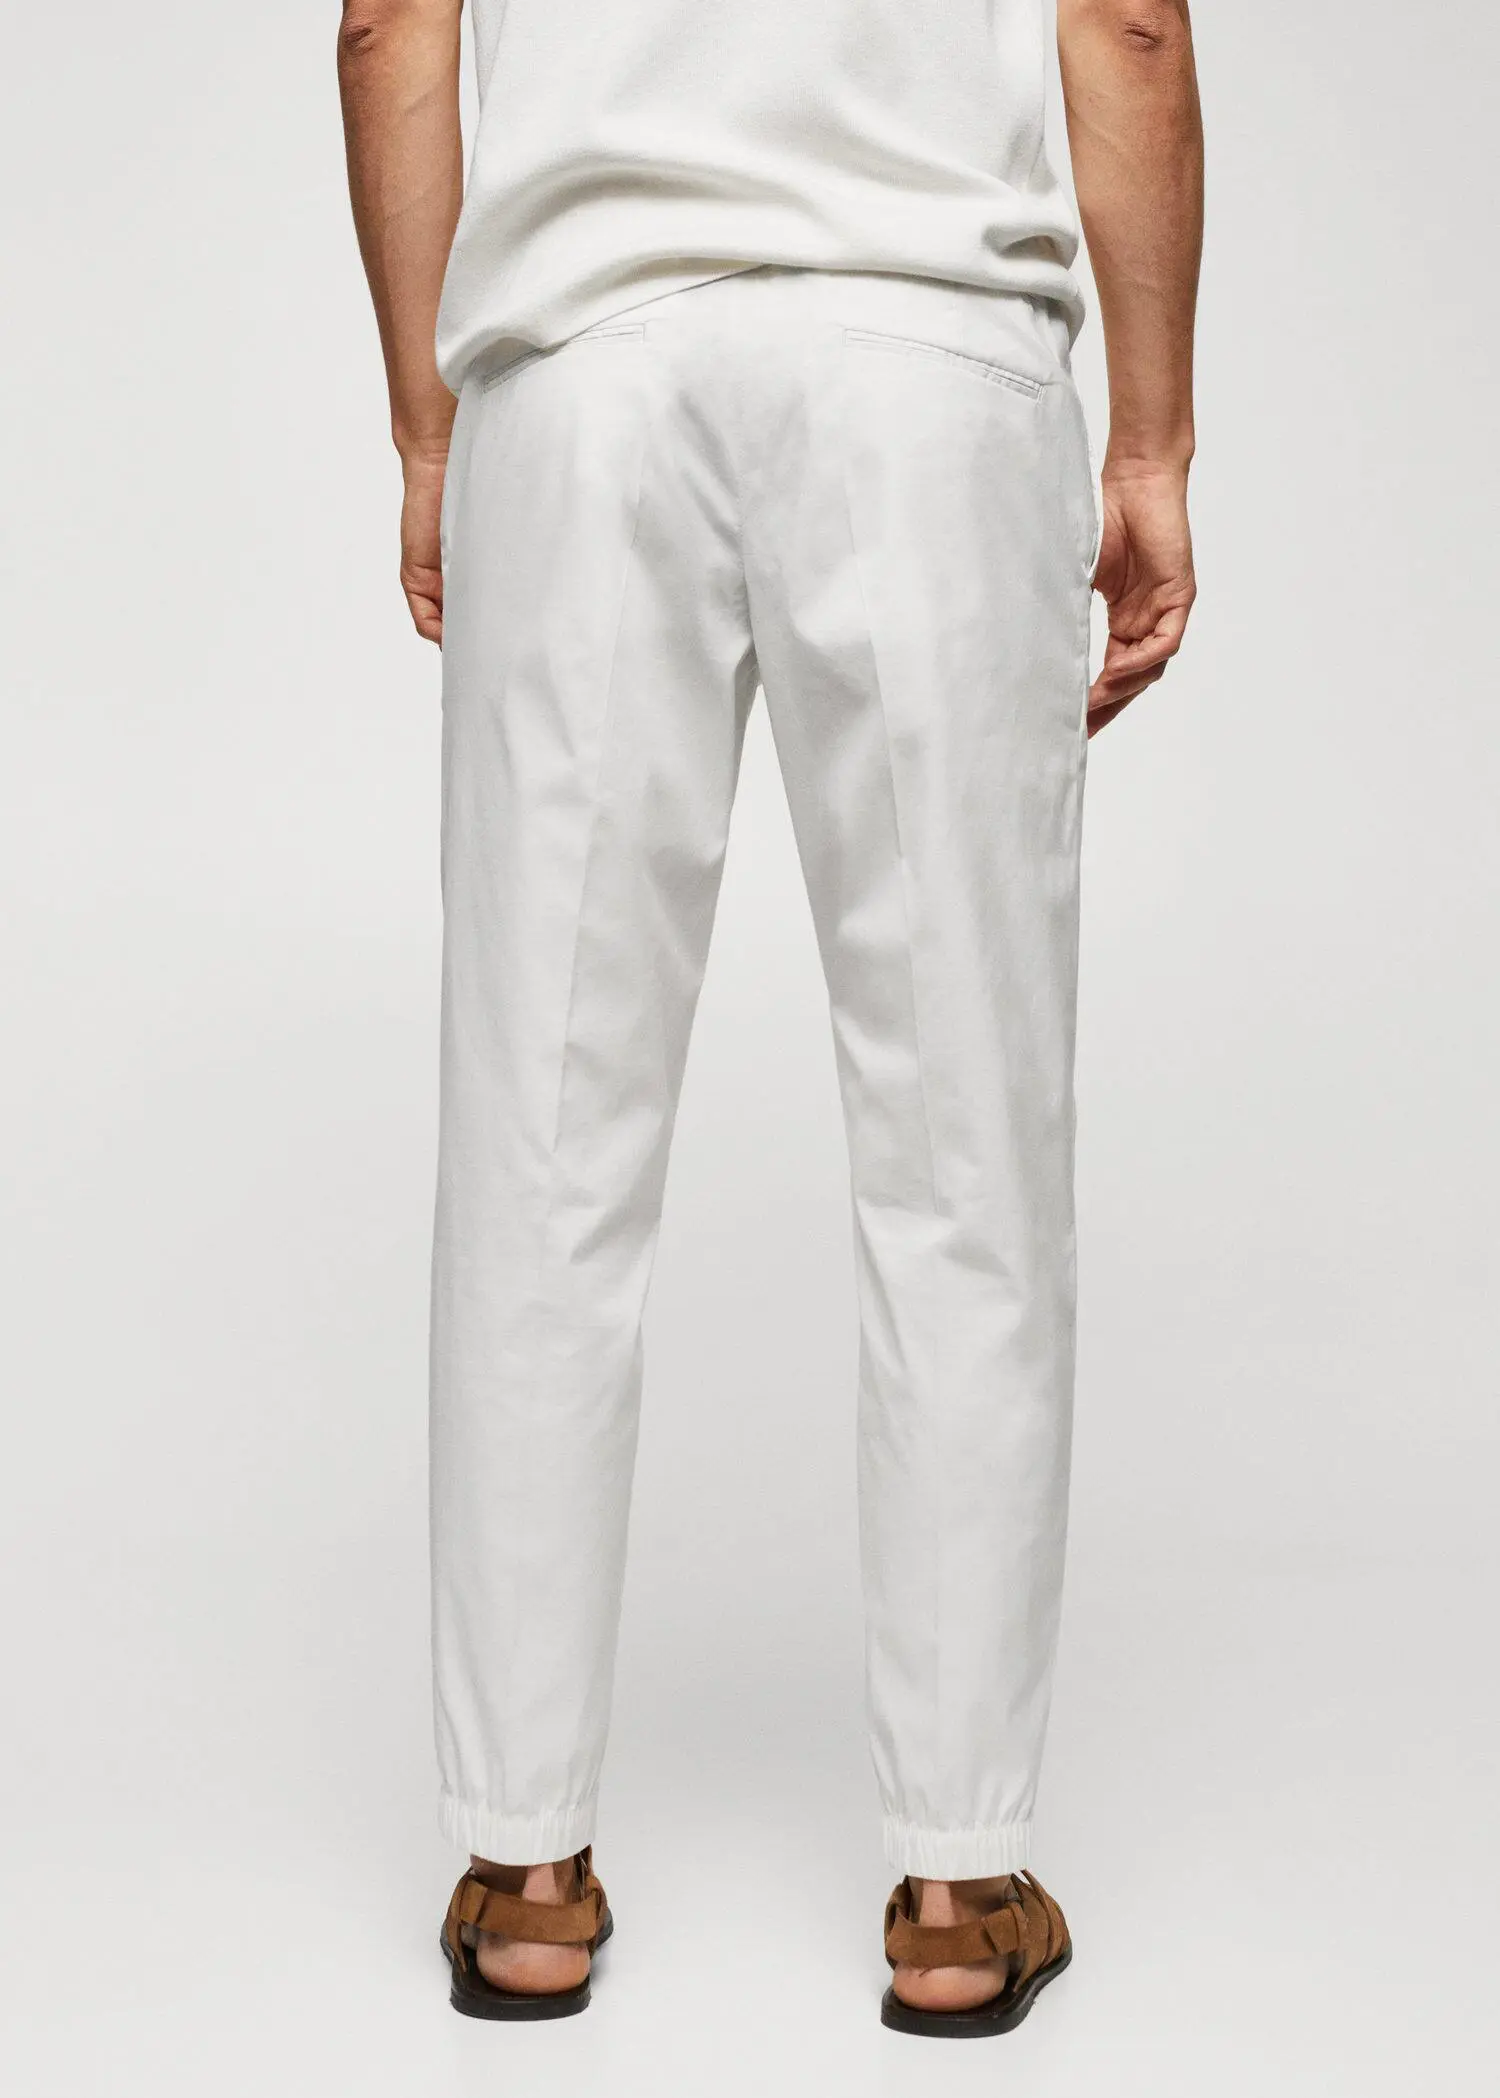 Mango Slim-fit cotton trousers. a person wearing white pants and a white shirt. 